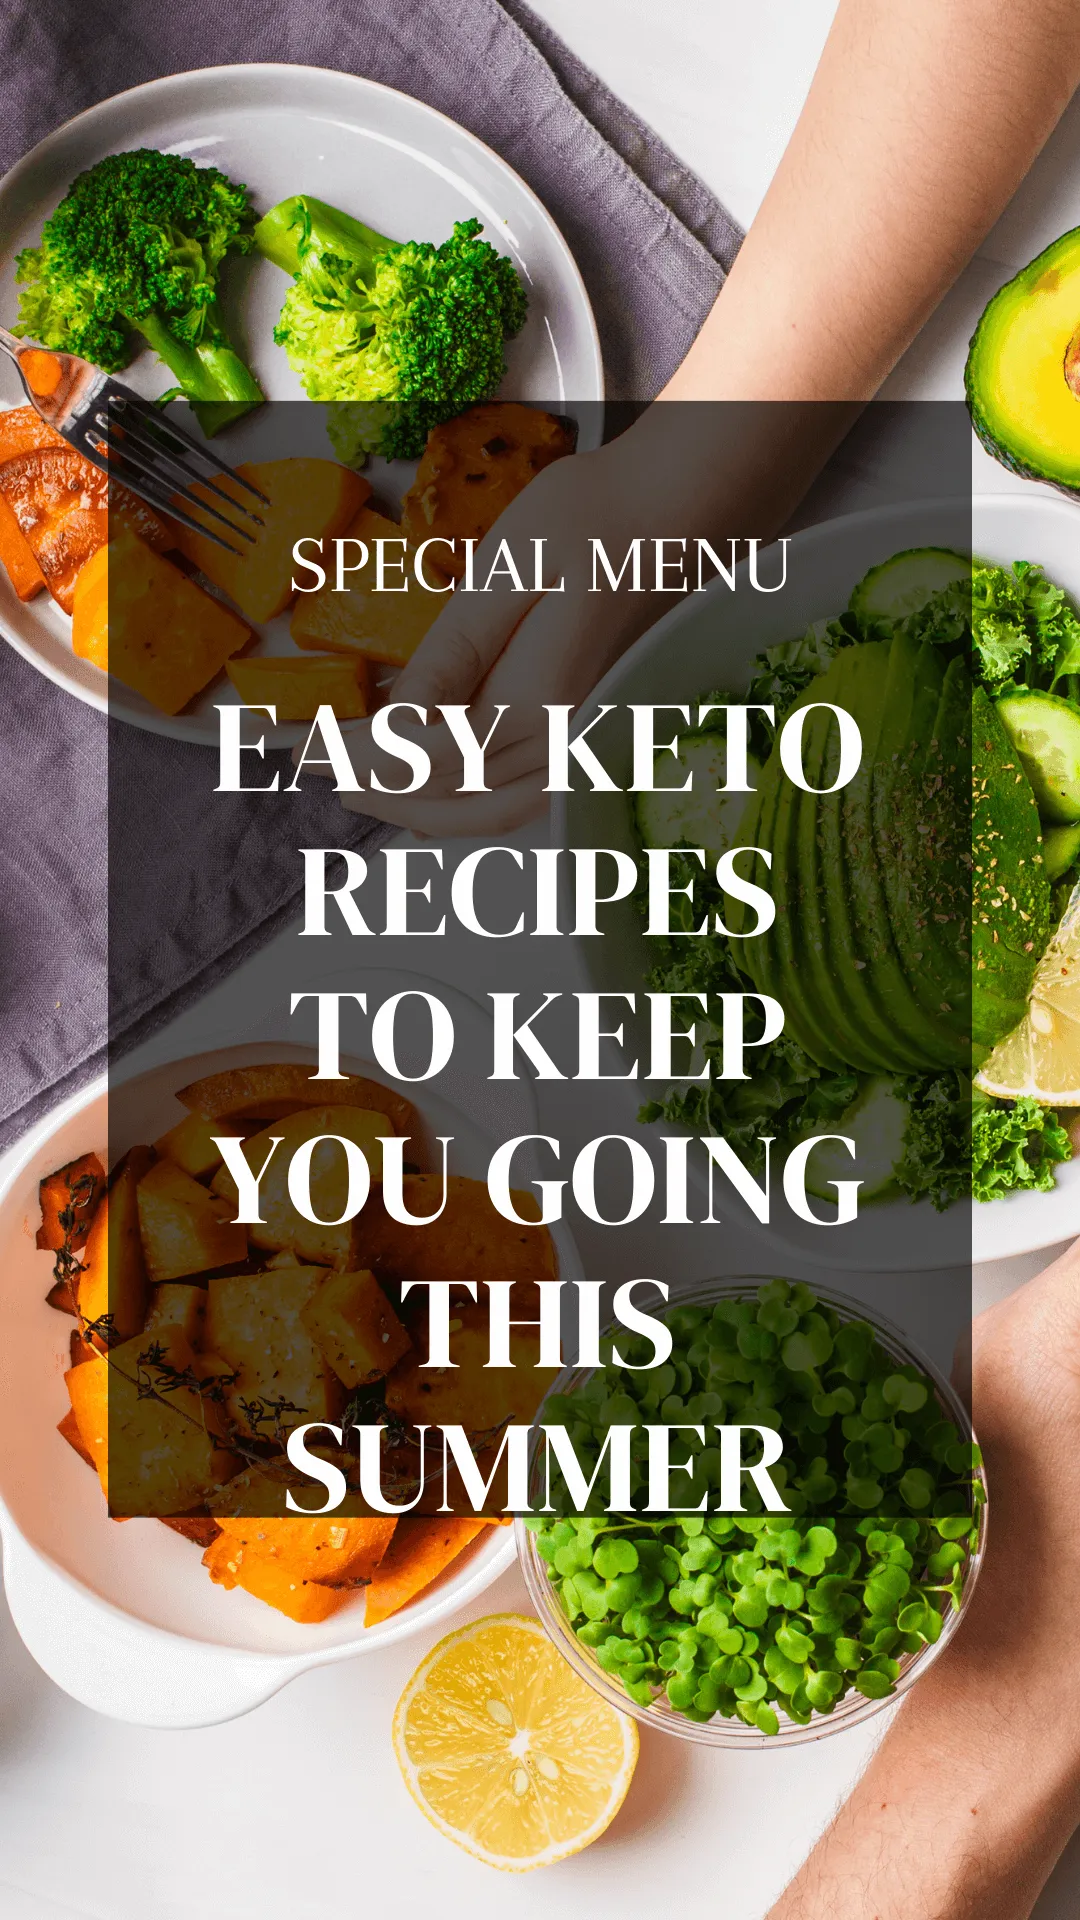 Easy KETO recipes to keep you healthy this SUMMER